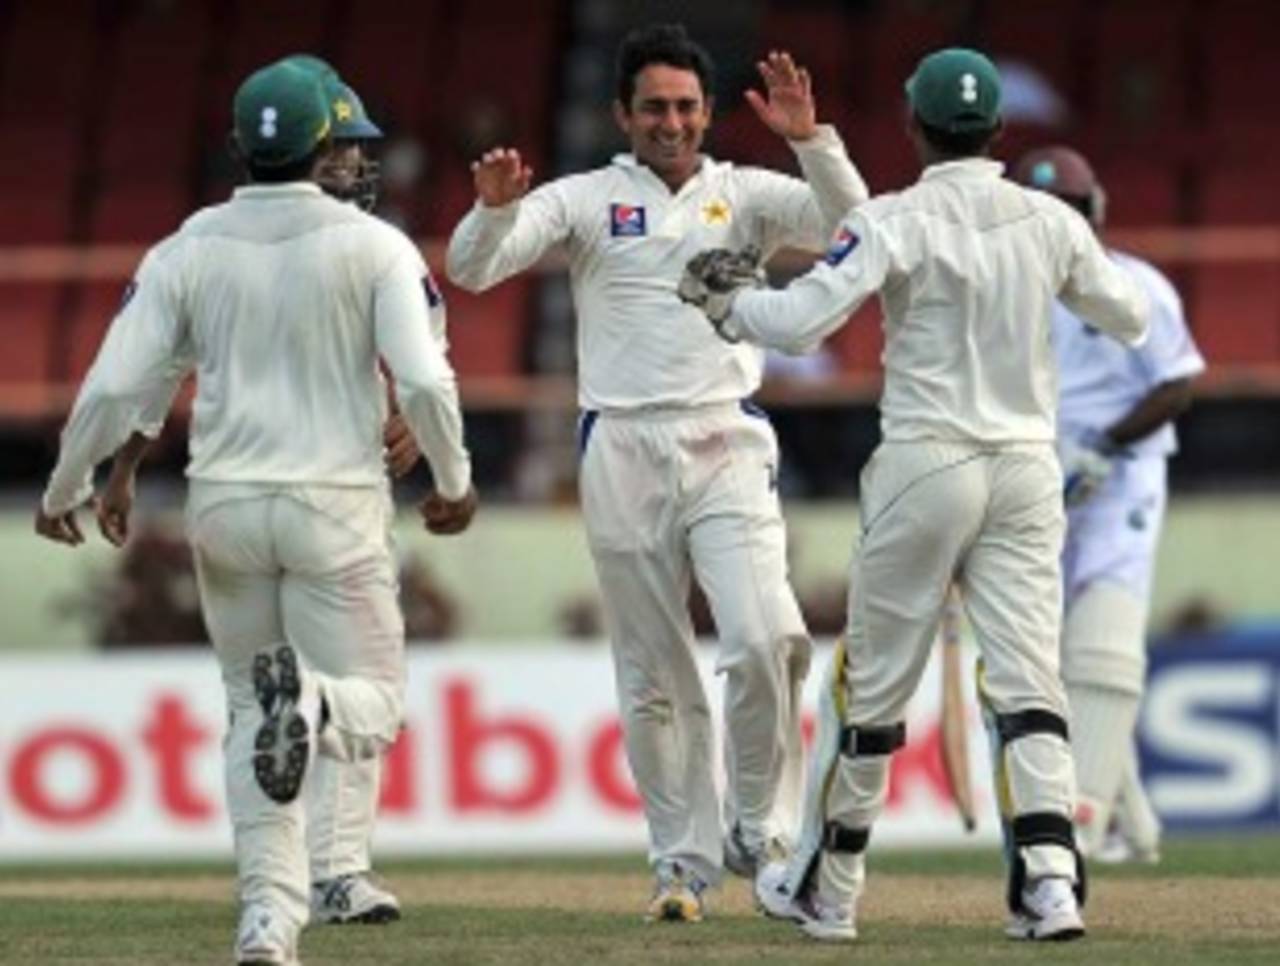 Saeed Ajmal picked up two wickets in quick succession after tea, West Indies v Pakistan, 1st Test, Providence, 1st day, May 12, 2011